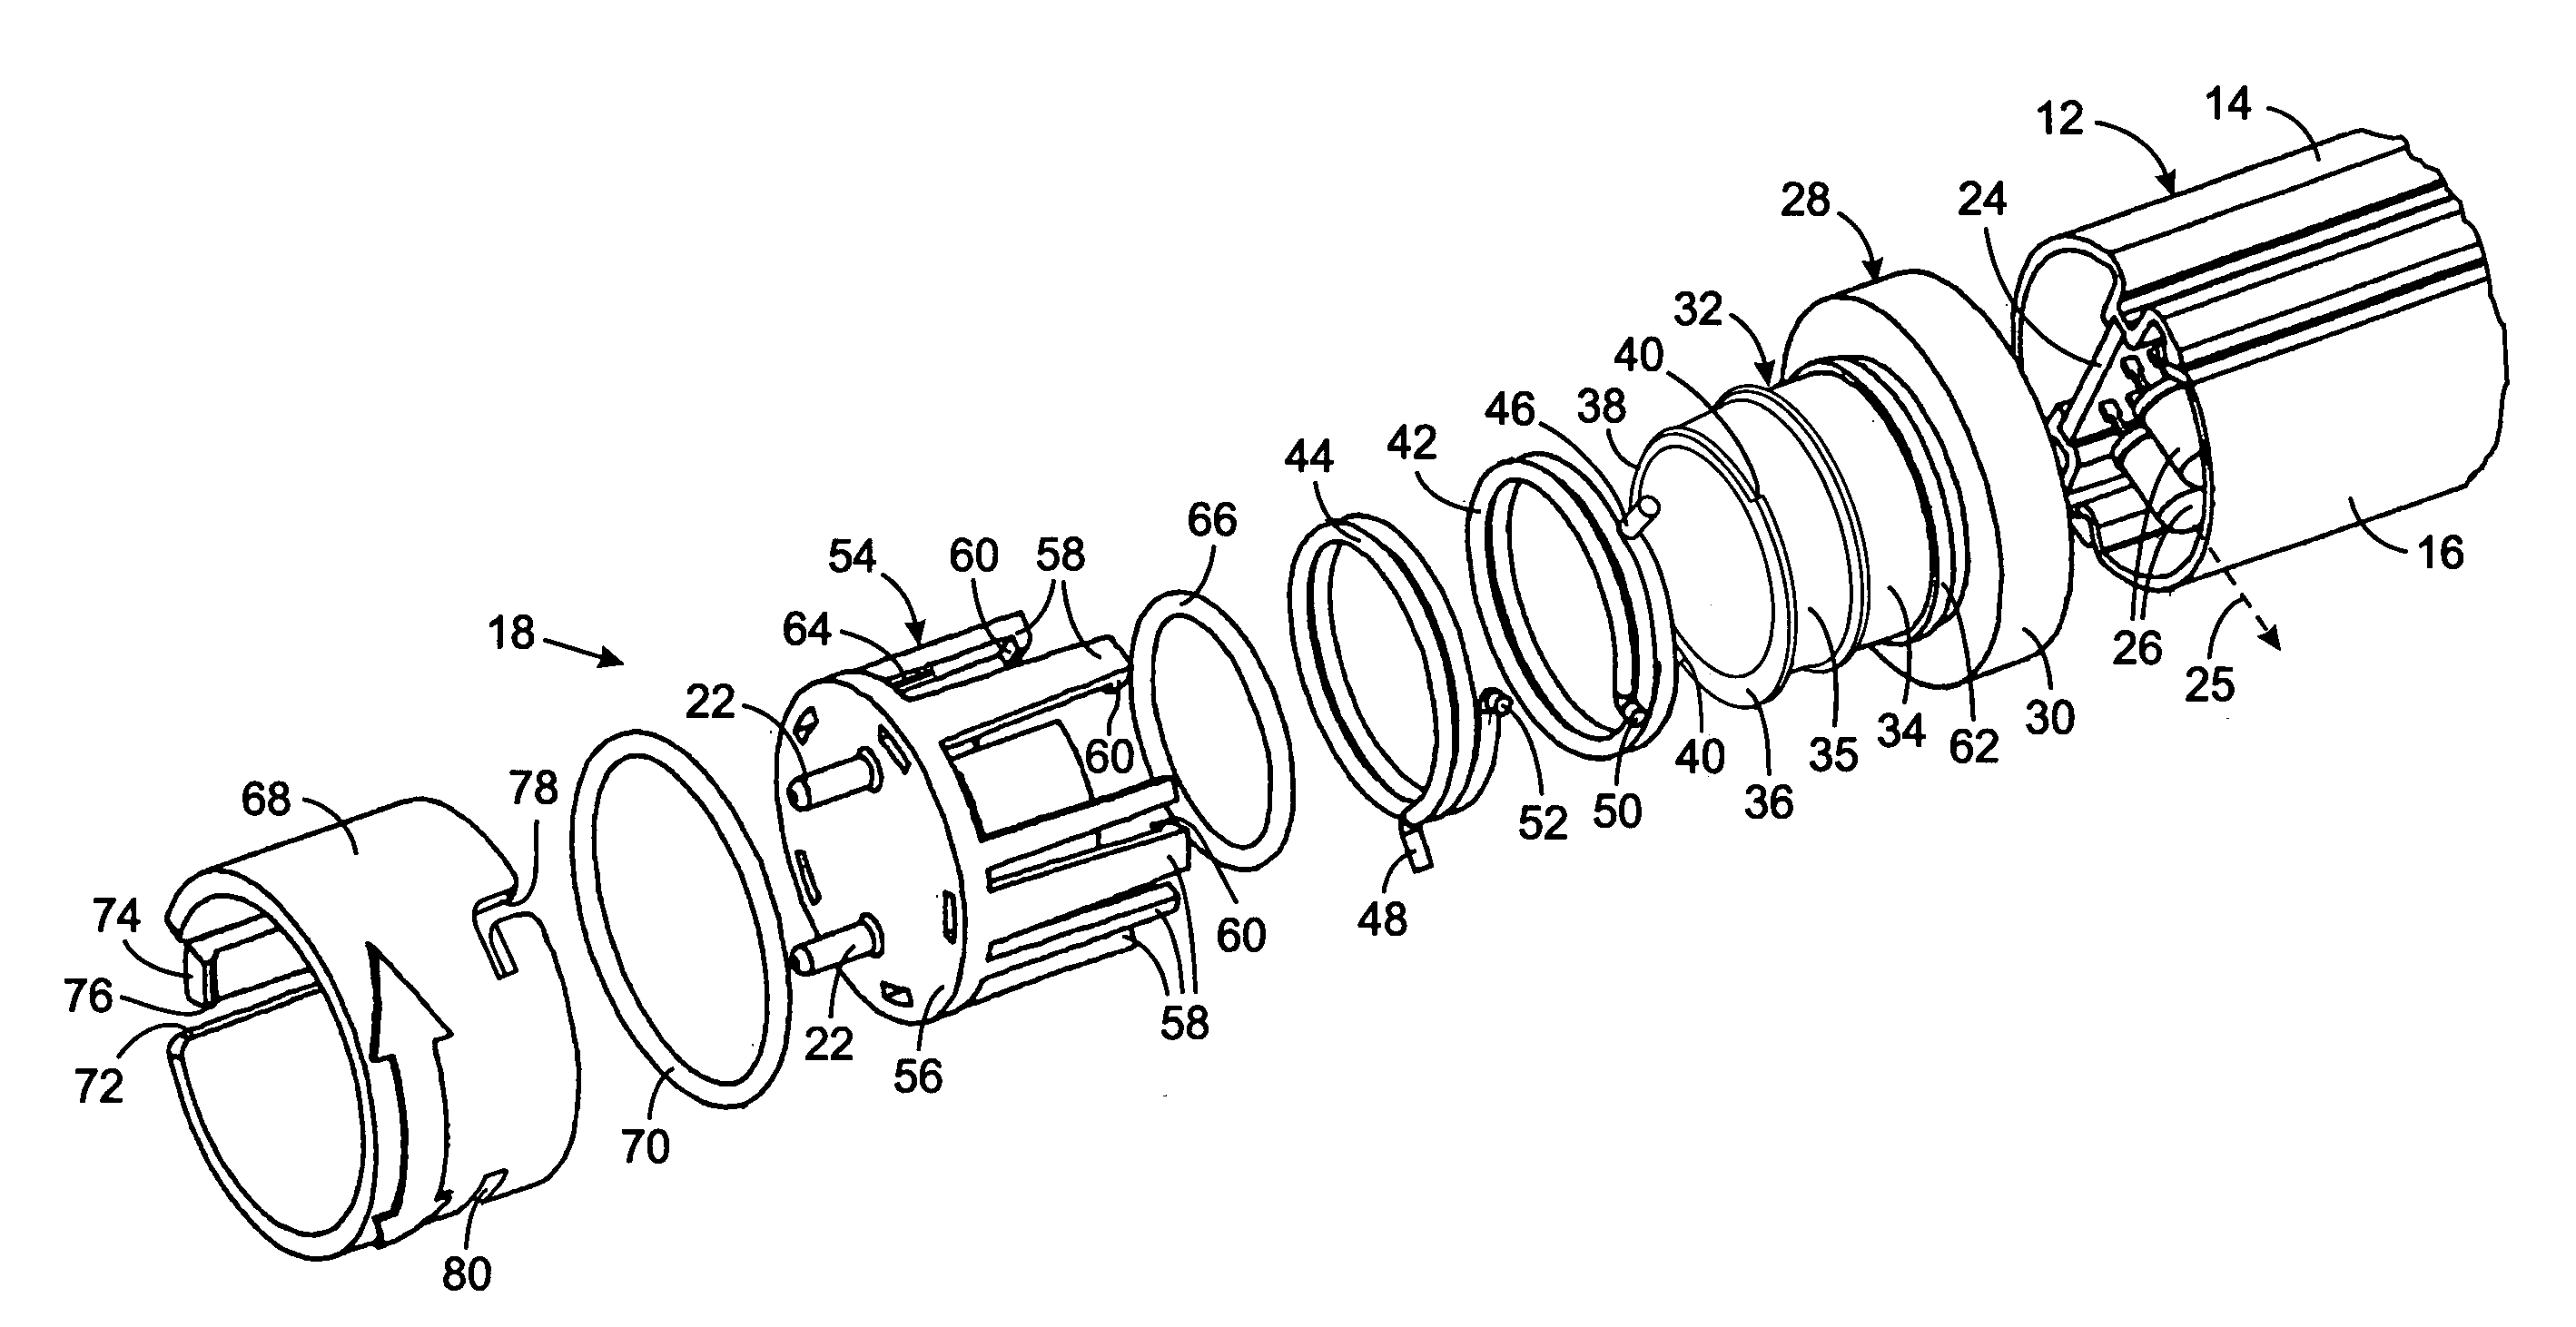 Lighting assembly with swivel end connectors